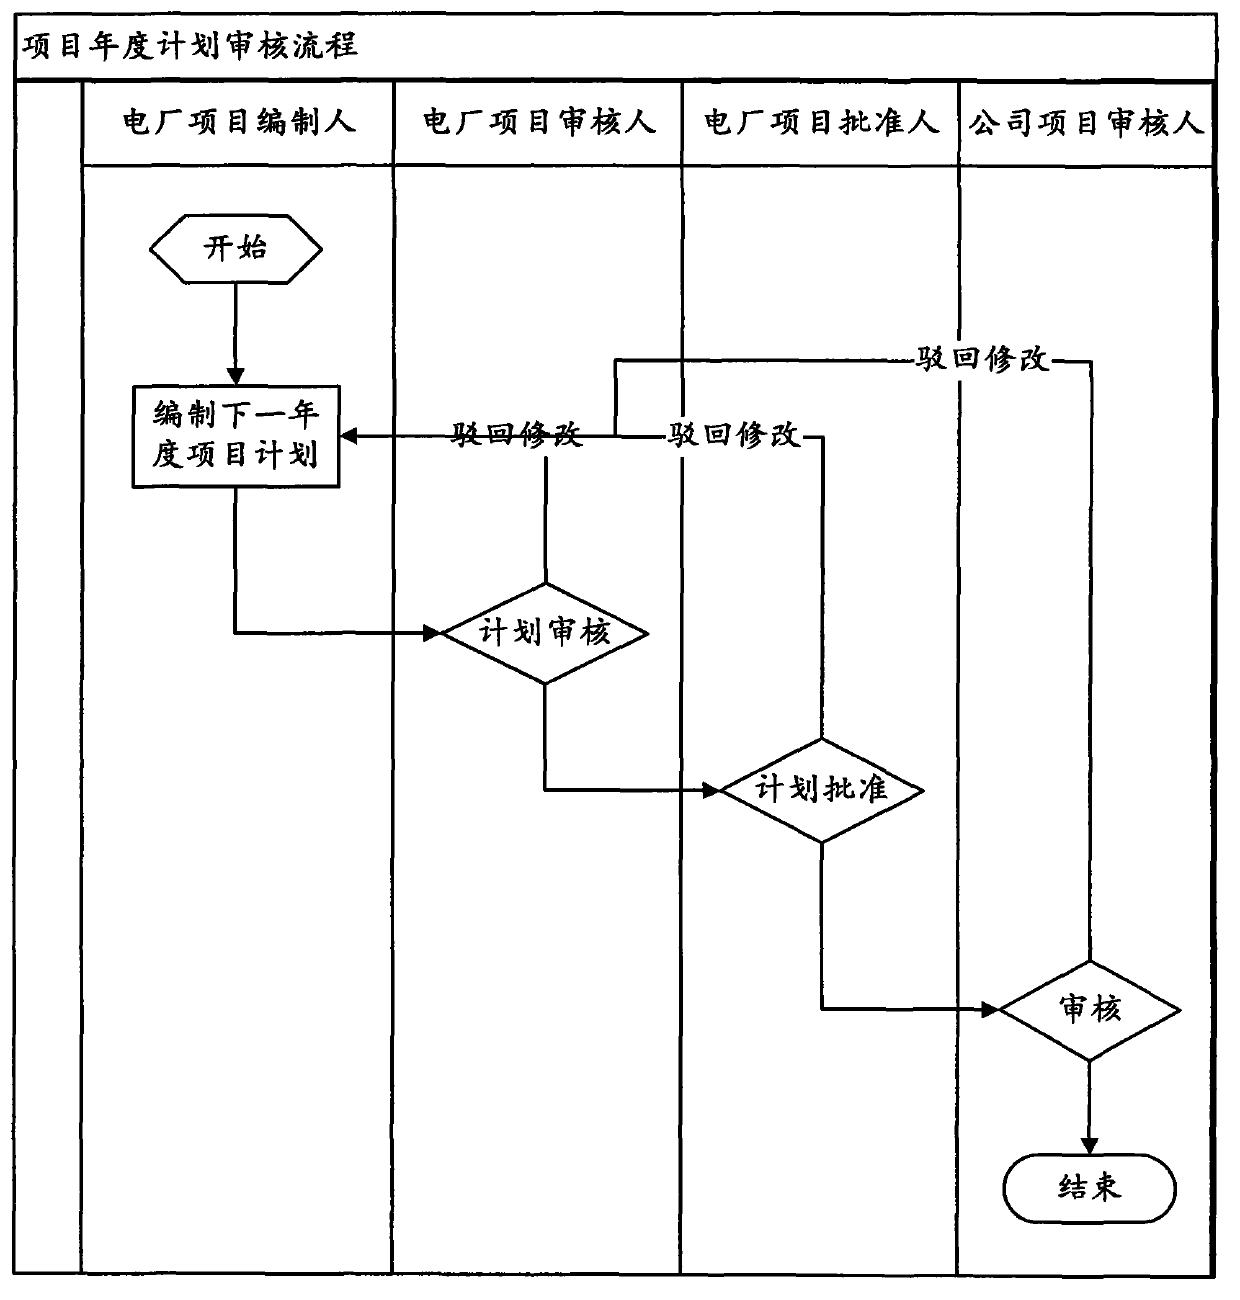 Method for planning inspection project in hydroelectric production management system